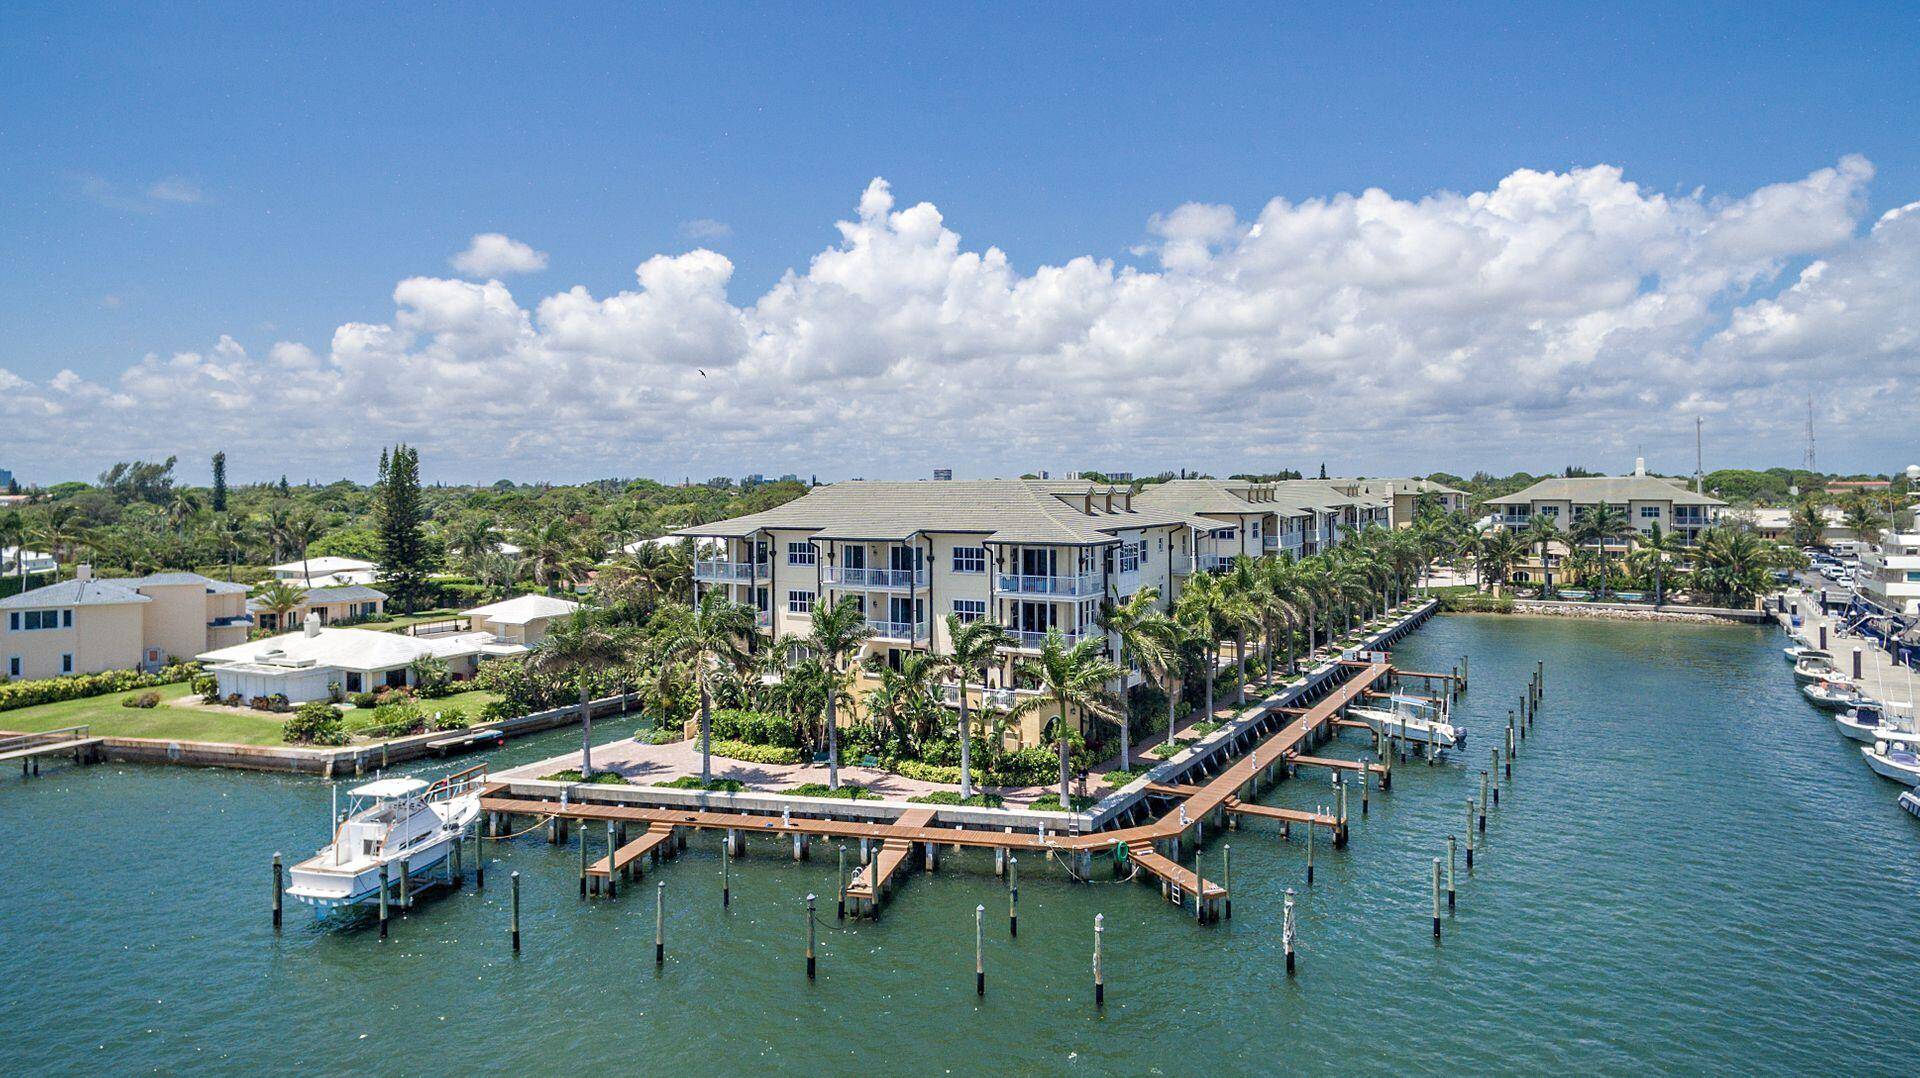 Enjoy the breathtaking Intracoastal water and mega yacht views from this fabulous 3bd 2.